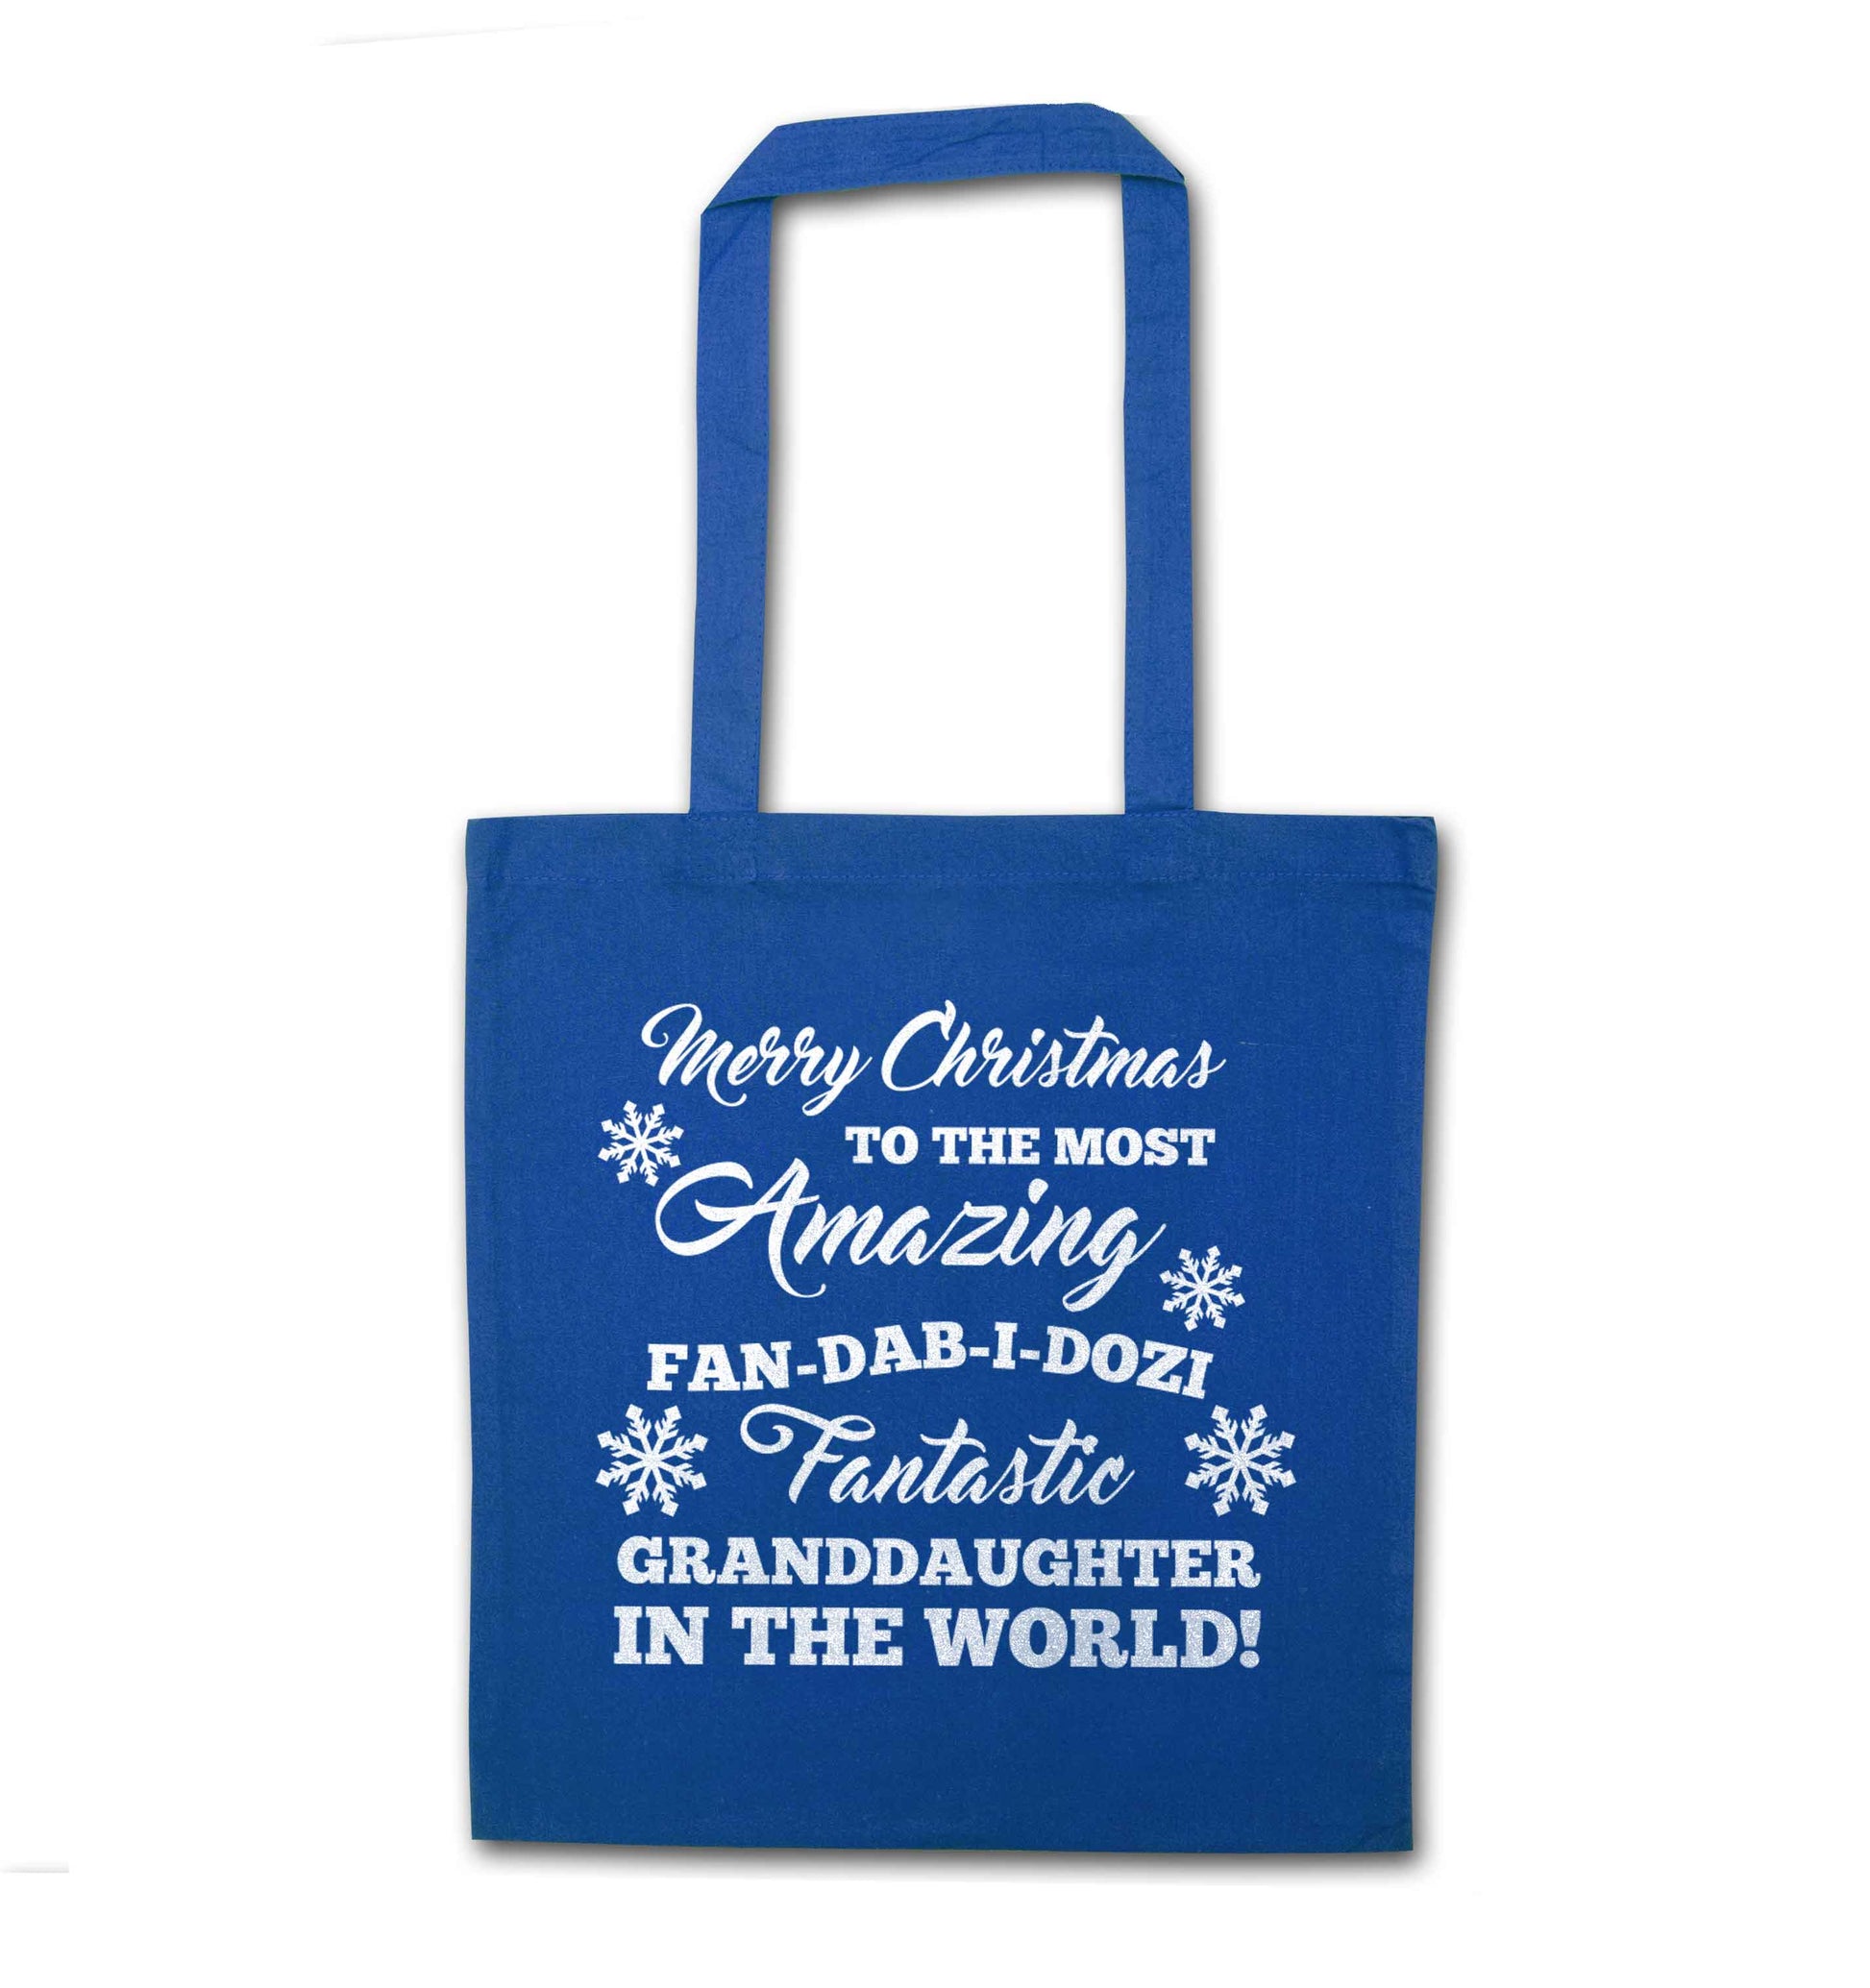 Merry Christmas to the most amazing fan-dab-i-dozi fantasic Granddaughter in the world blue tote bag